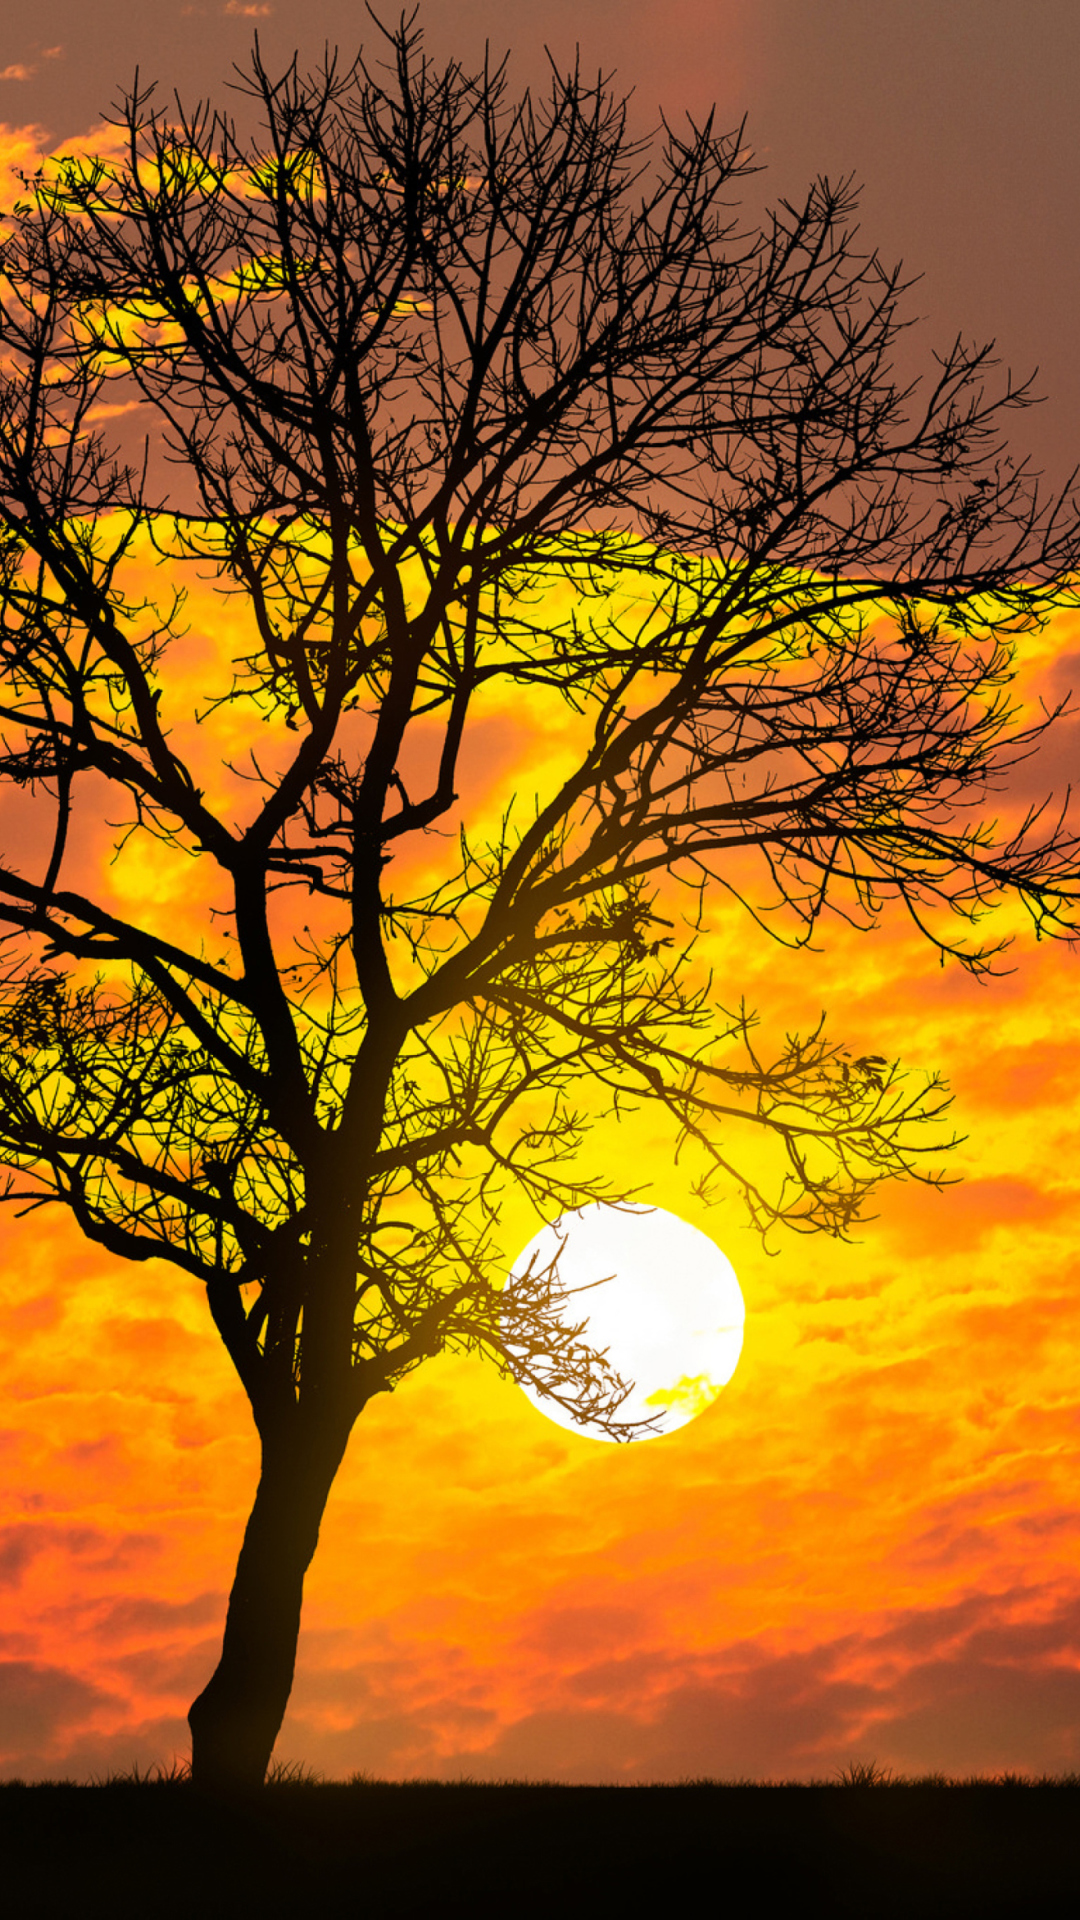 Sunset Behind Branches wallpaper 1080x1920